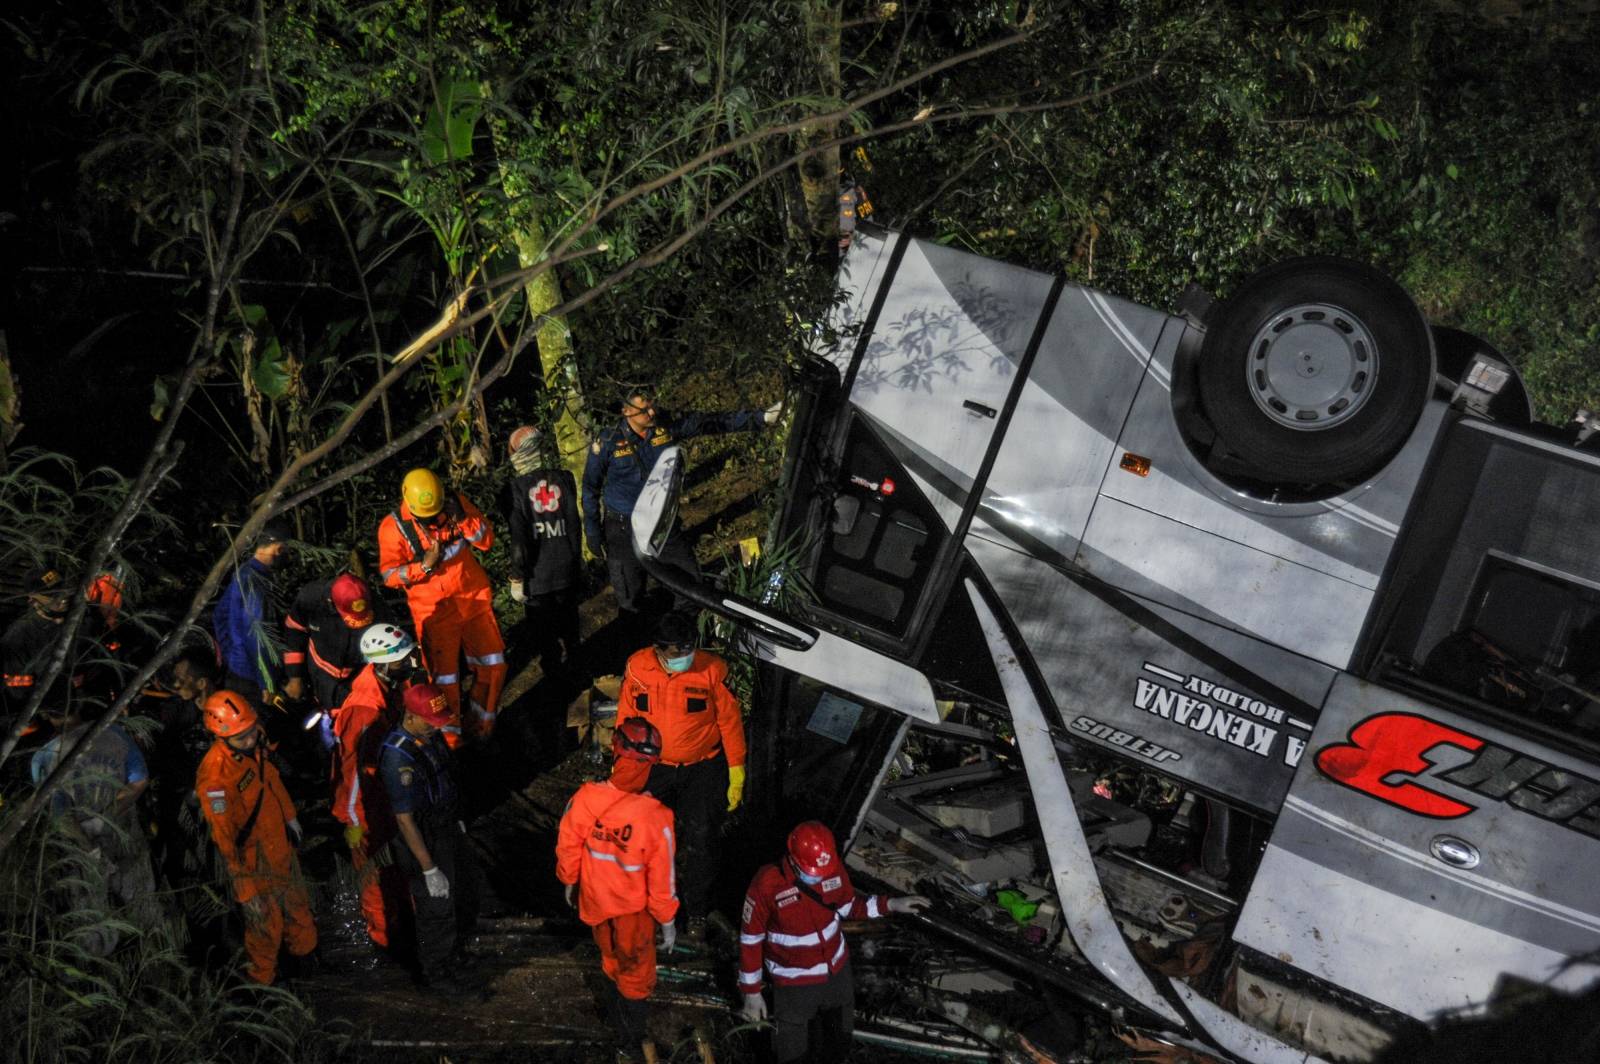 Rescue personnel work at the crash site after a bus fell into a ravine in Sumedang, Indonesia